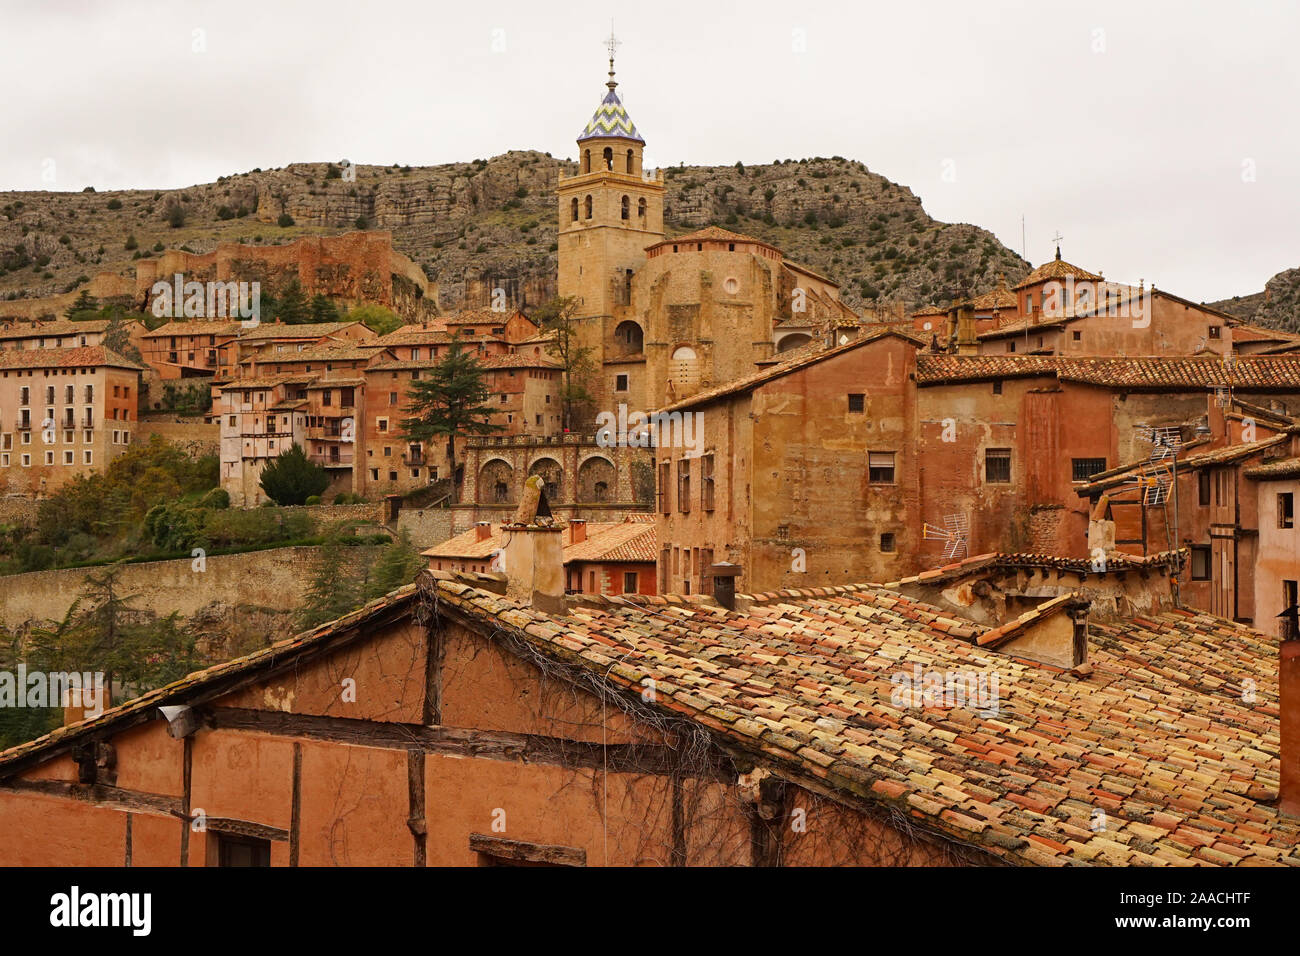 The rooftops of Albarracin, an old medieval town in the hills of Tereul, Northern Spain Stock Photo